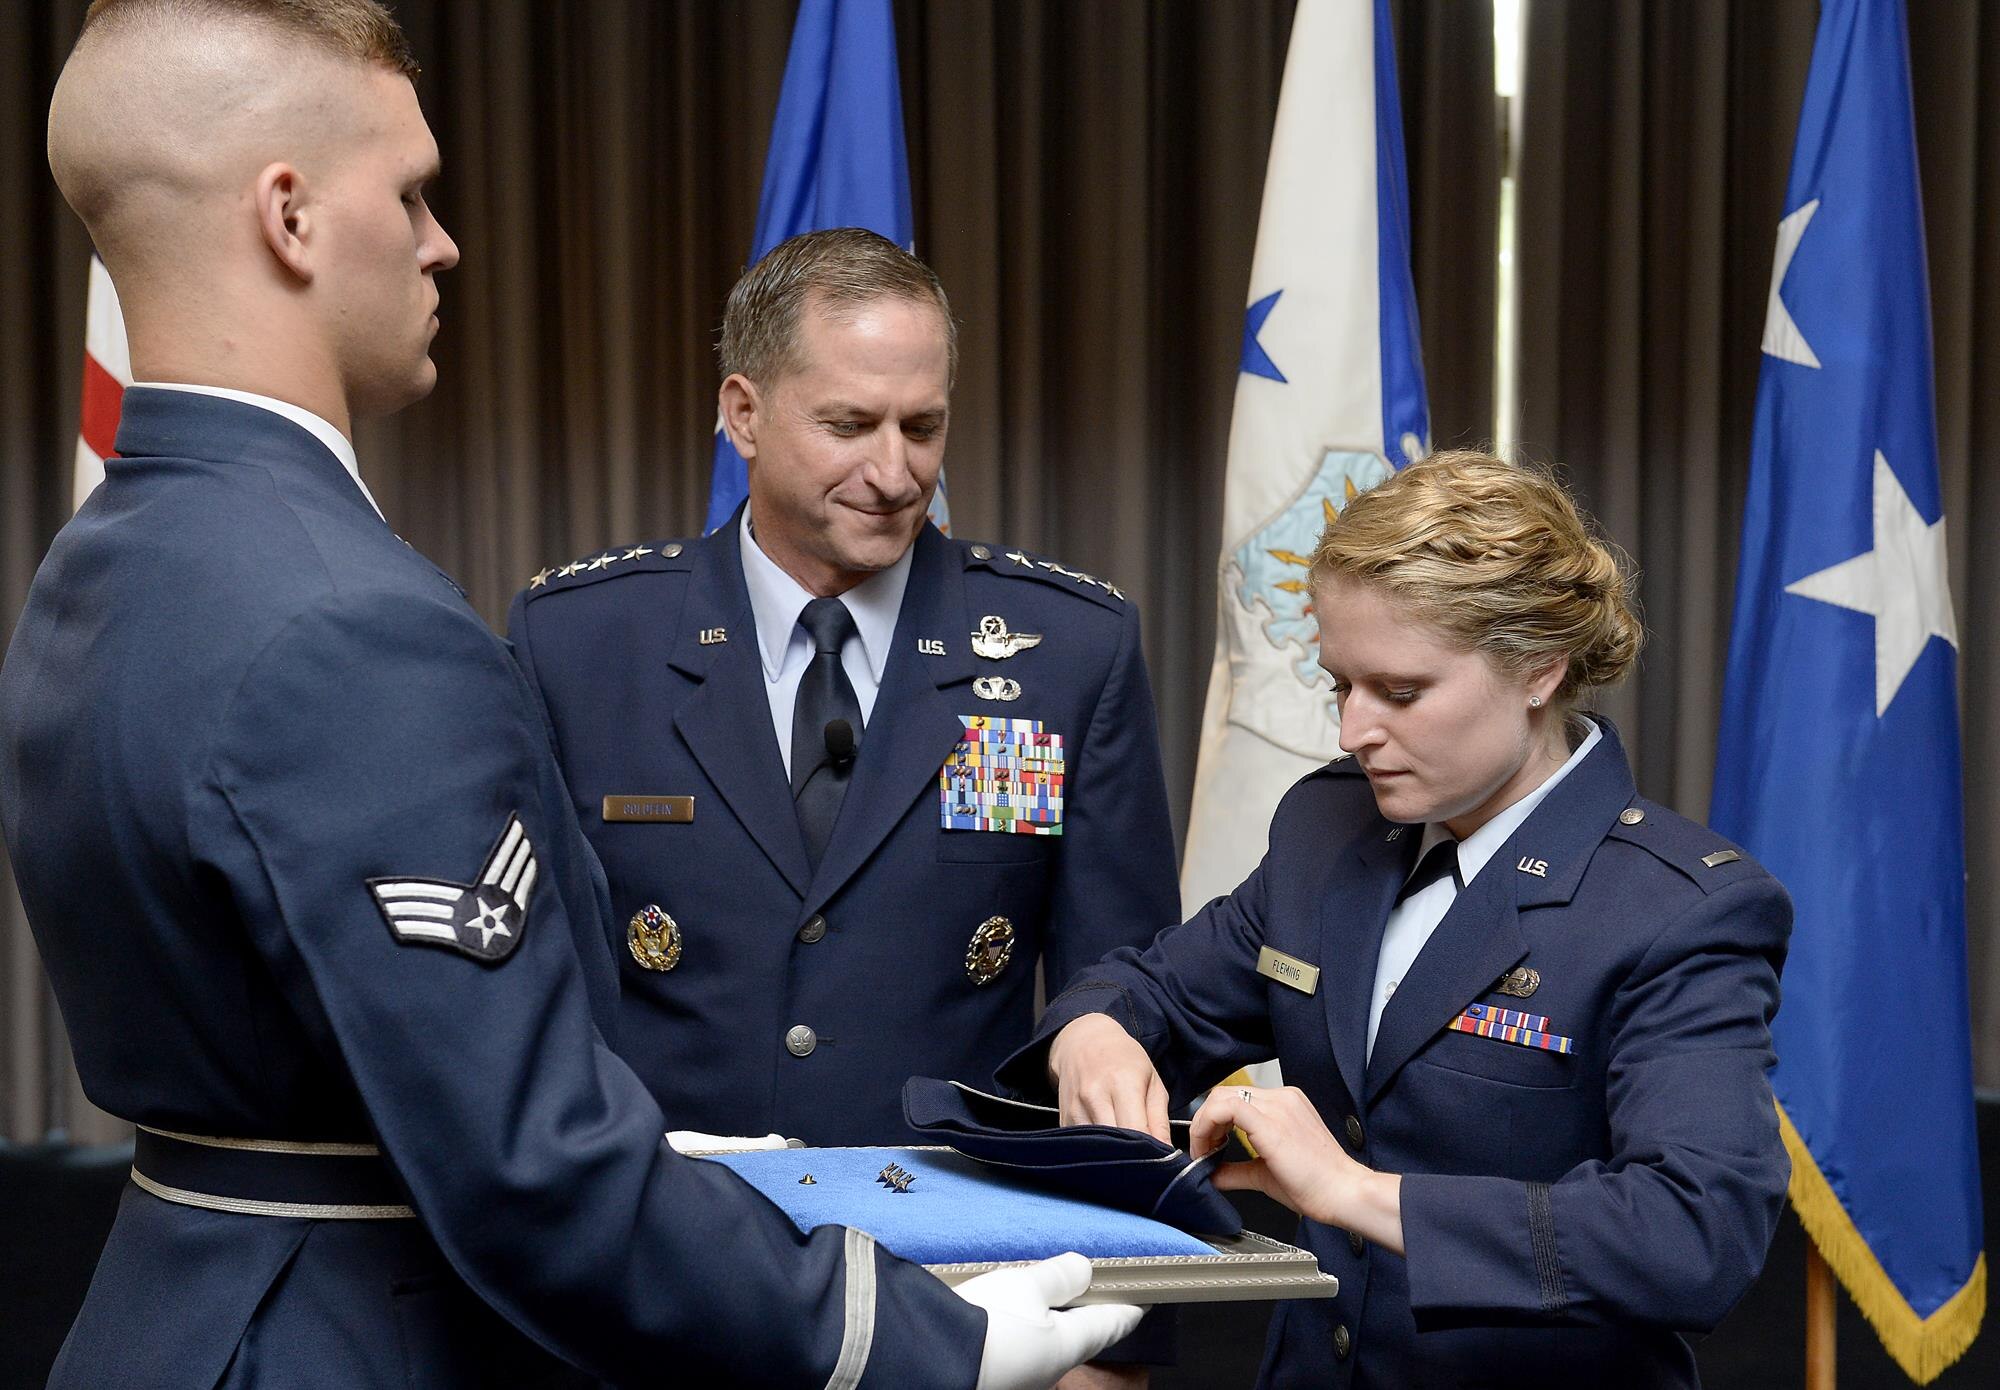 The rank of general is pinned on David L. Goldfein's flight cap by his daughter, 1st Lt. Danielle Fleming, during his promotion ceremony Aug. 6, 2015, in Washington, D.C. Goldfein's promotion makes him the Air Force's 38th vice chief of staff.  (U.S. Air Force photo/Scott M. Ash)